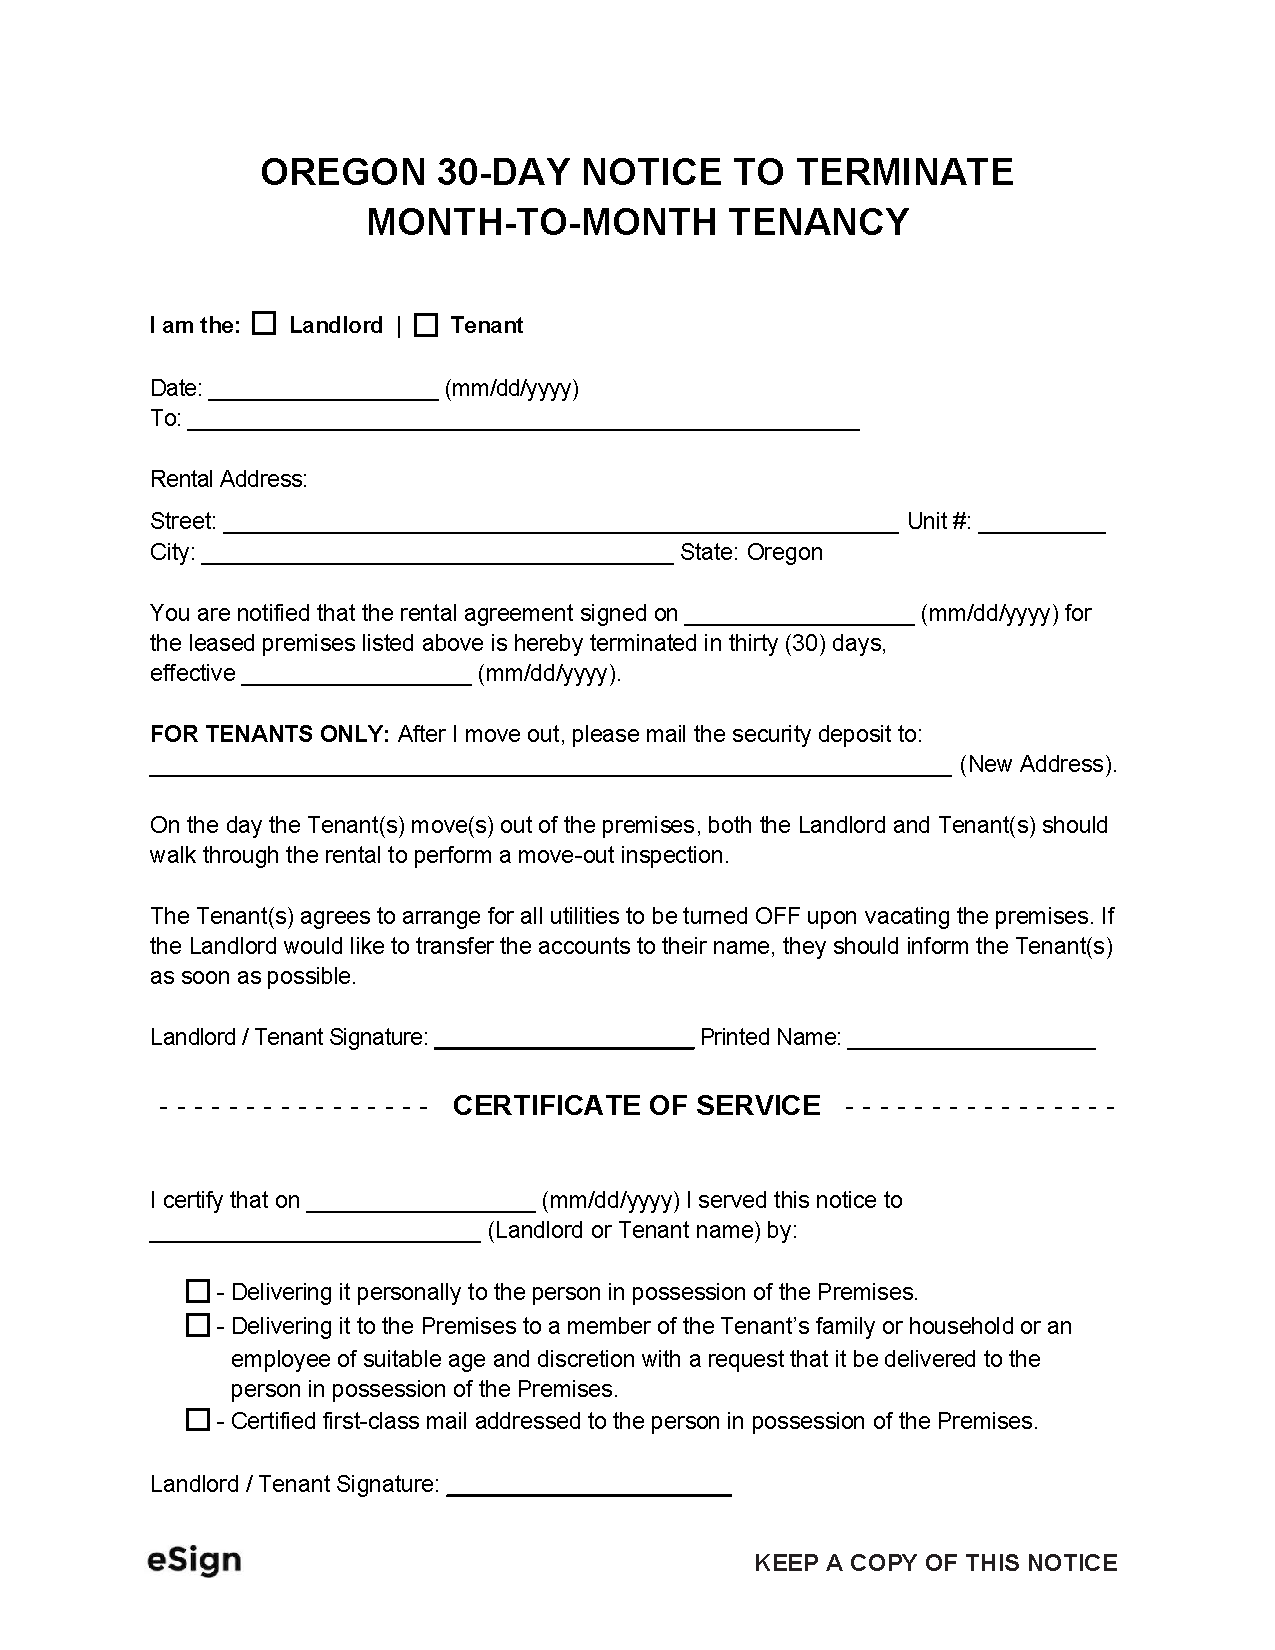 free-oregon-30-day-notice-to-quit-lease-termination-letter-pdf-word